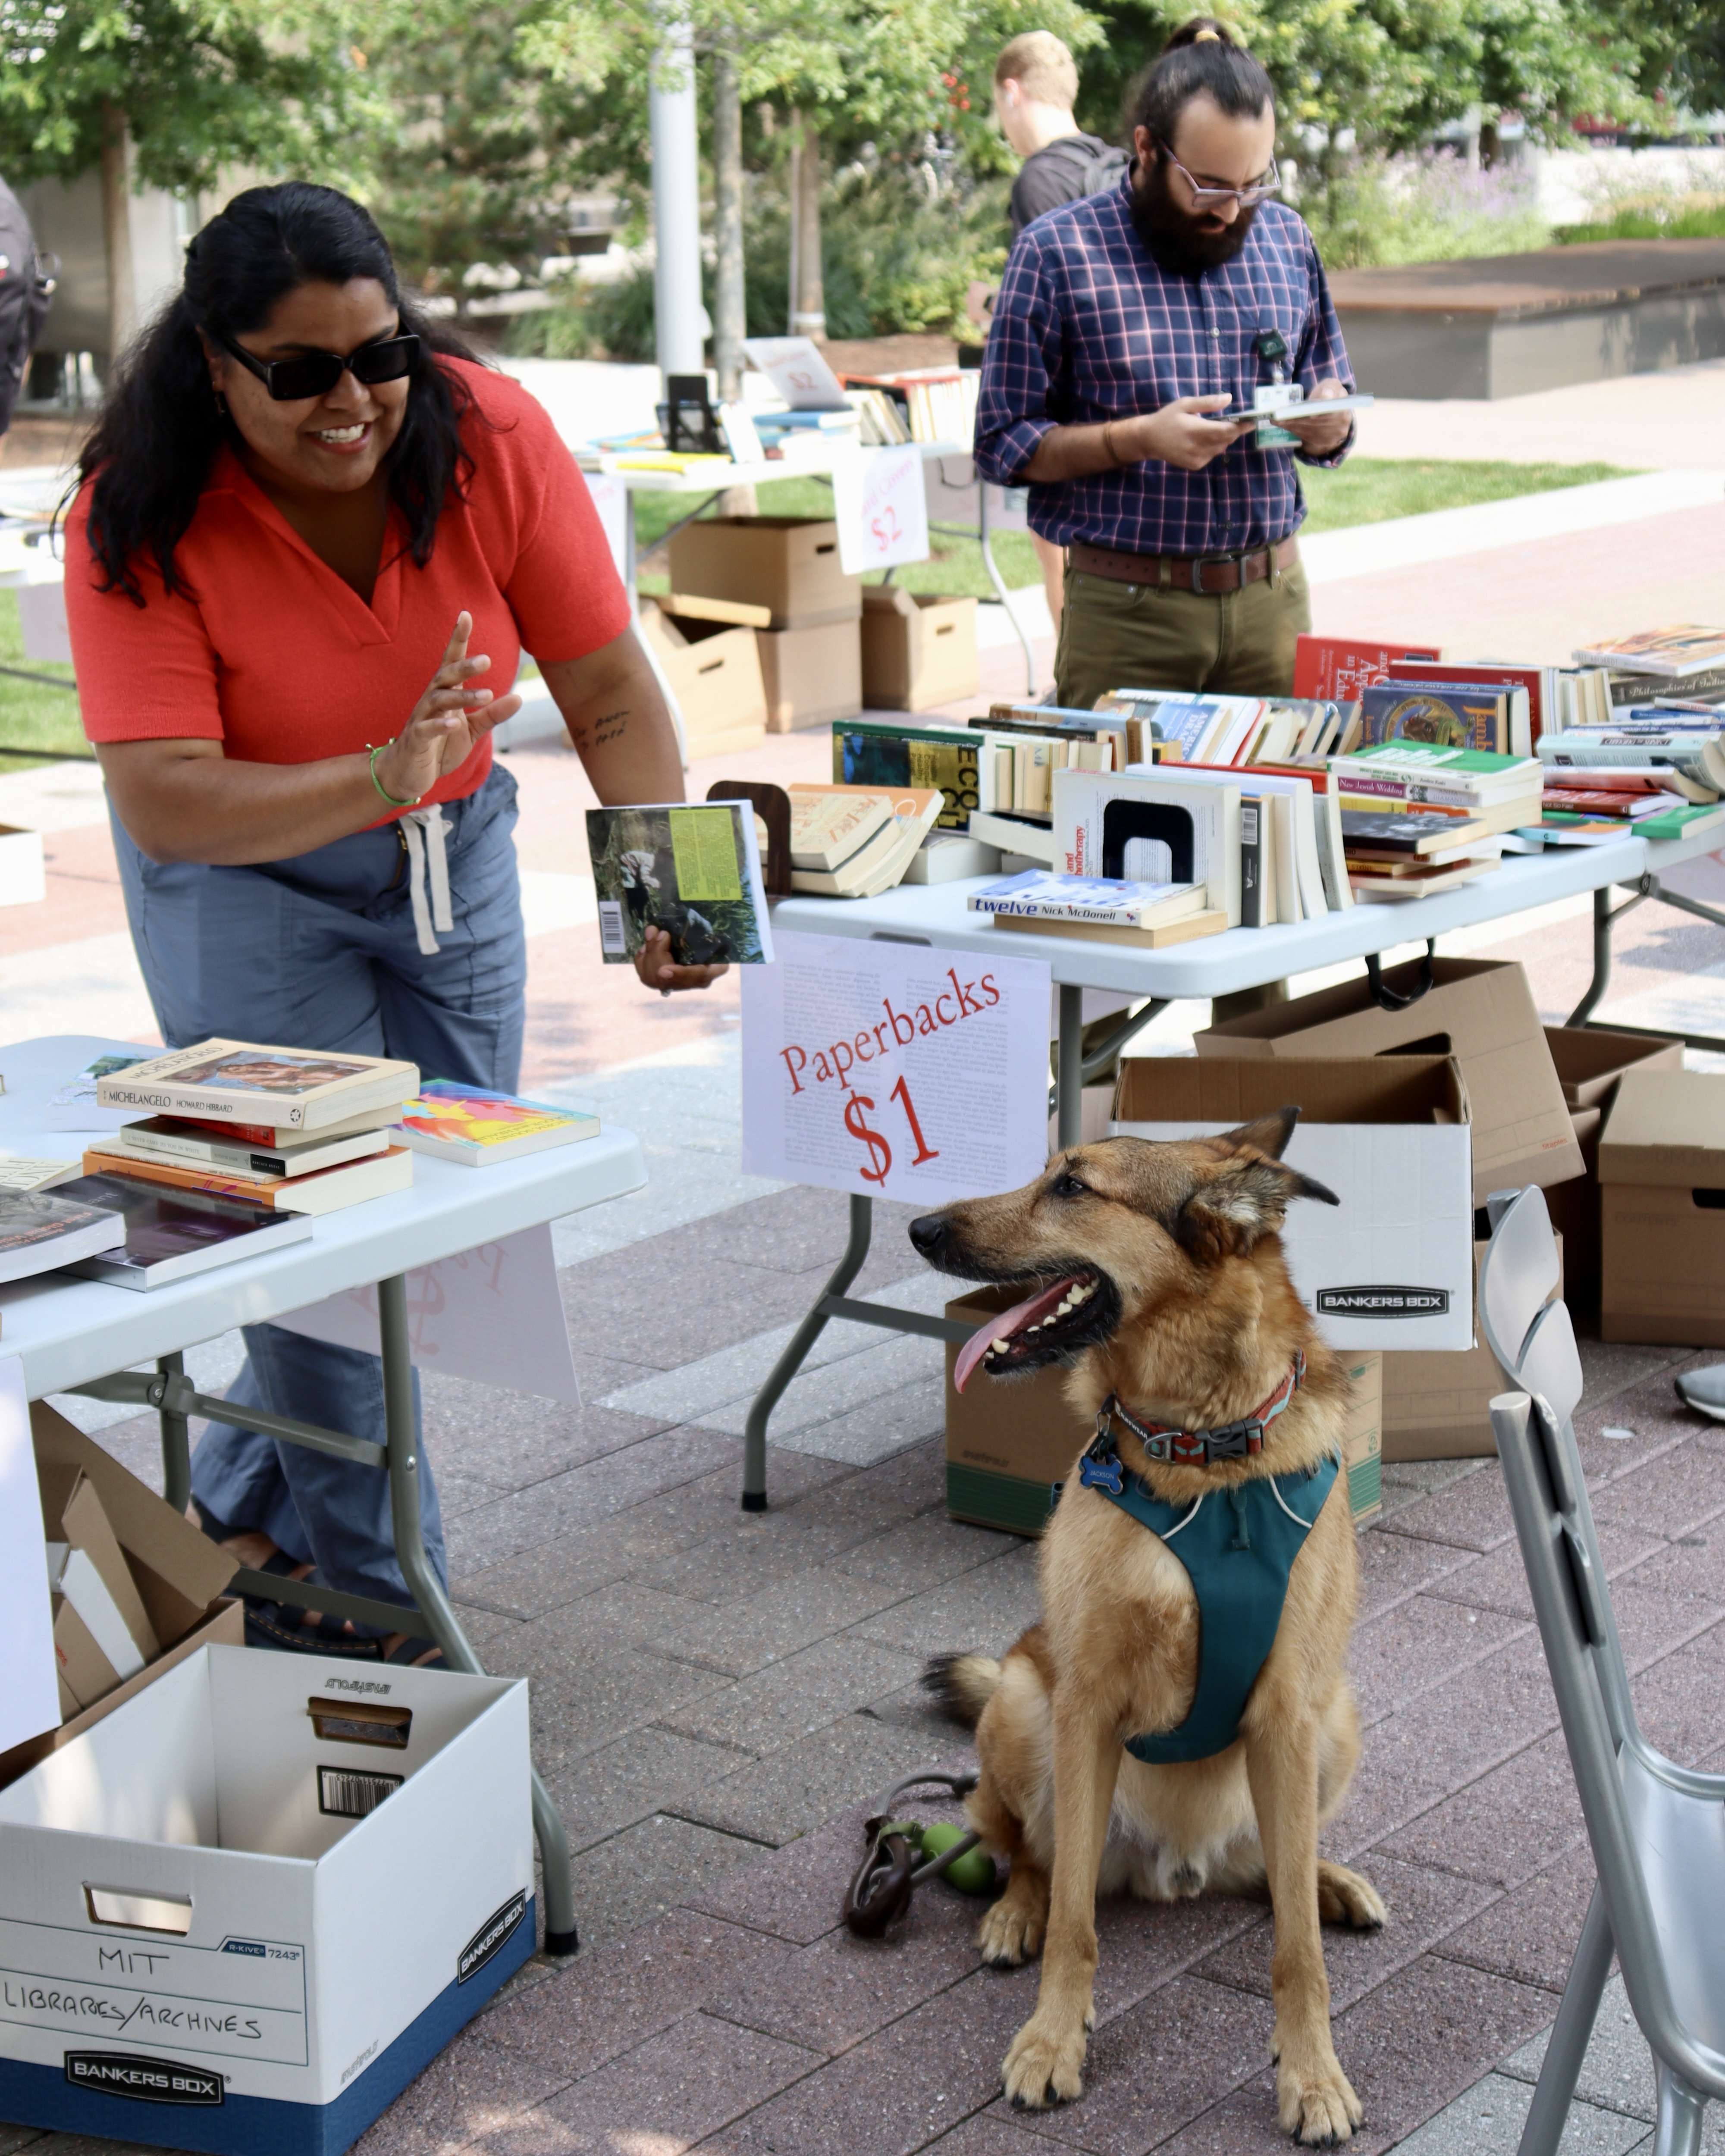 With a stock of books including 50-cent children’s books, dollar paperbacks, and two-dollar hardcover coffee-table books, the used book sale had something for everyone — even the dogs.